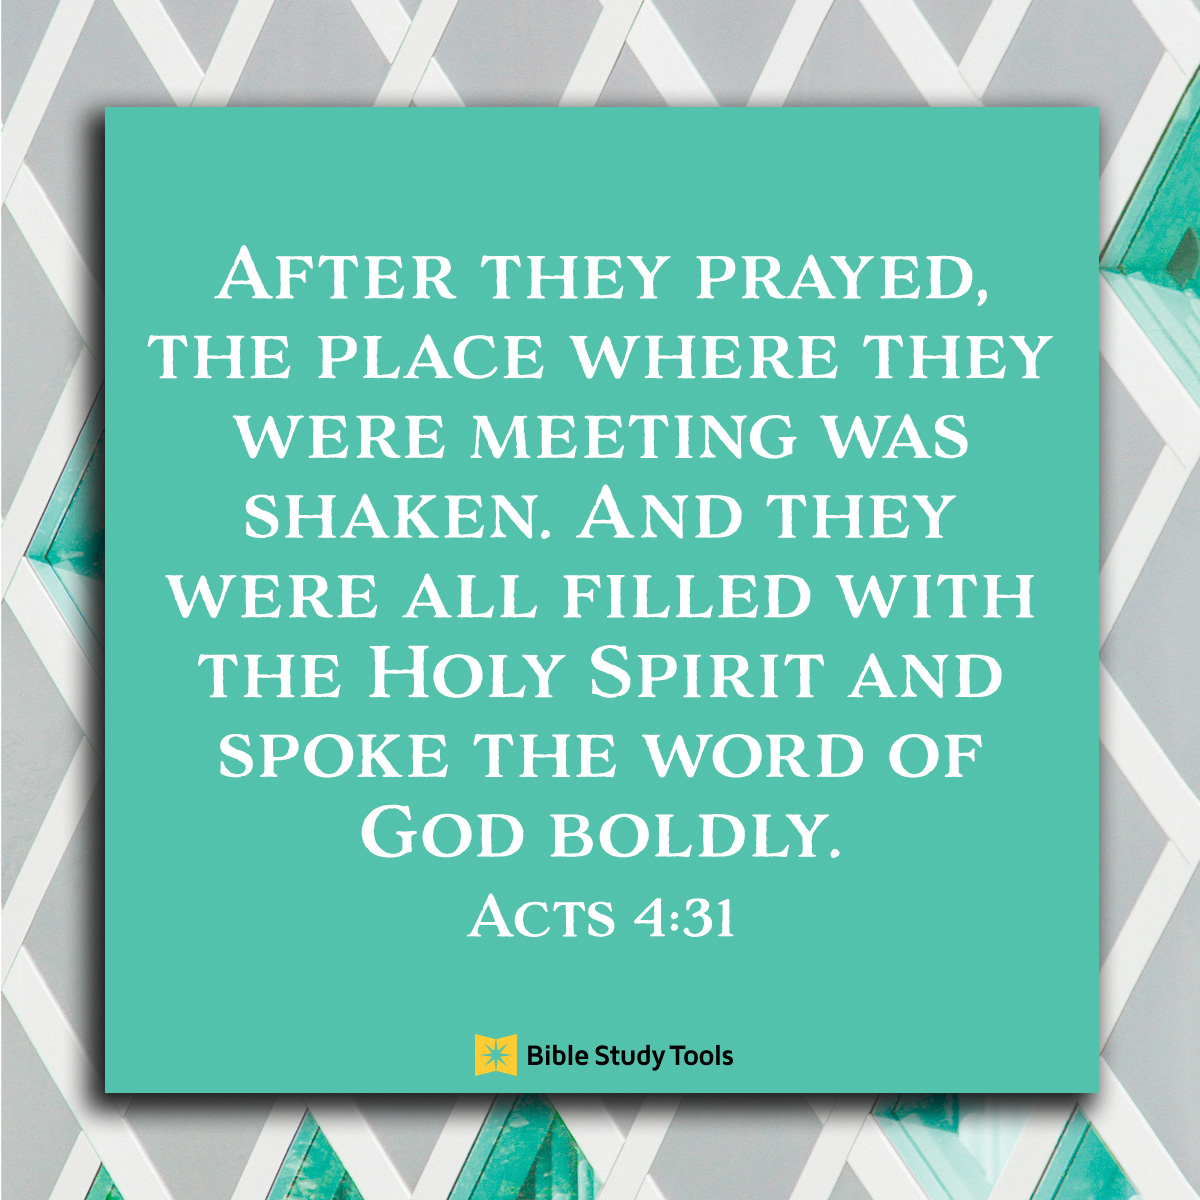 acts 4:31